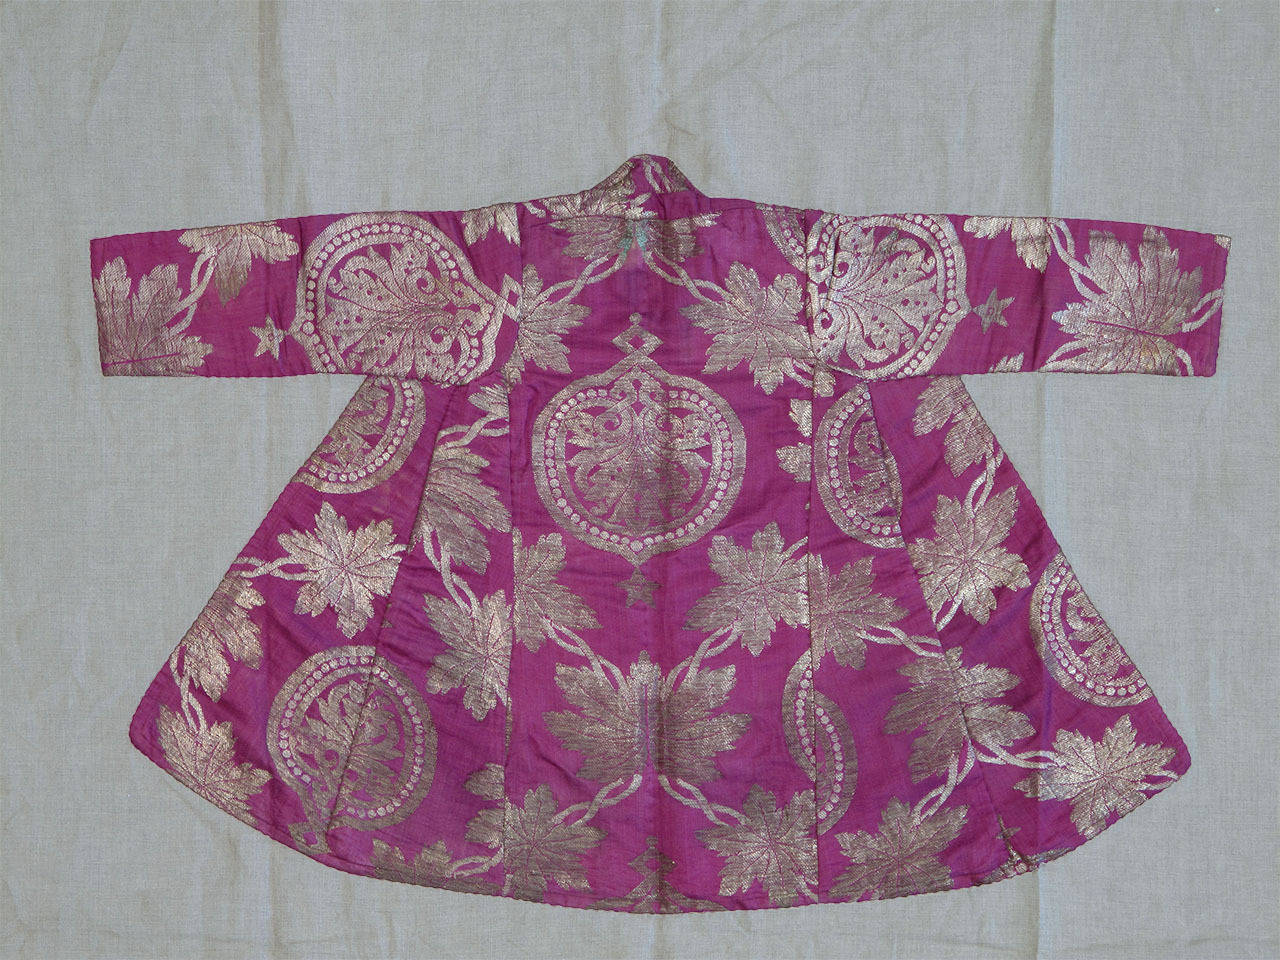 A luxurious coat for a child, from Uzbekistan in Central Asia. Metal thread (gold or silver) brocading on silk, a technique and style favored among the urban classes in Bukhara, Samarkand, etc. in the 19th century.

Mounted on linen, ready for